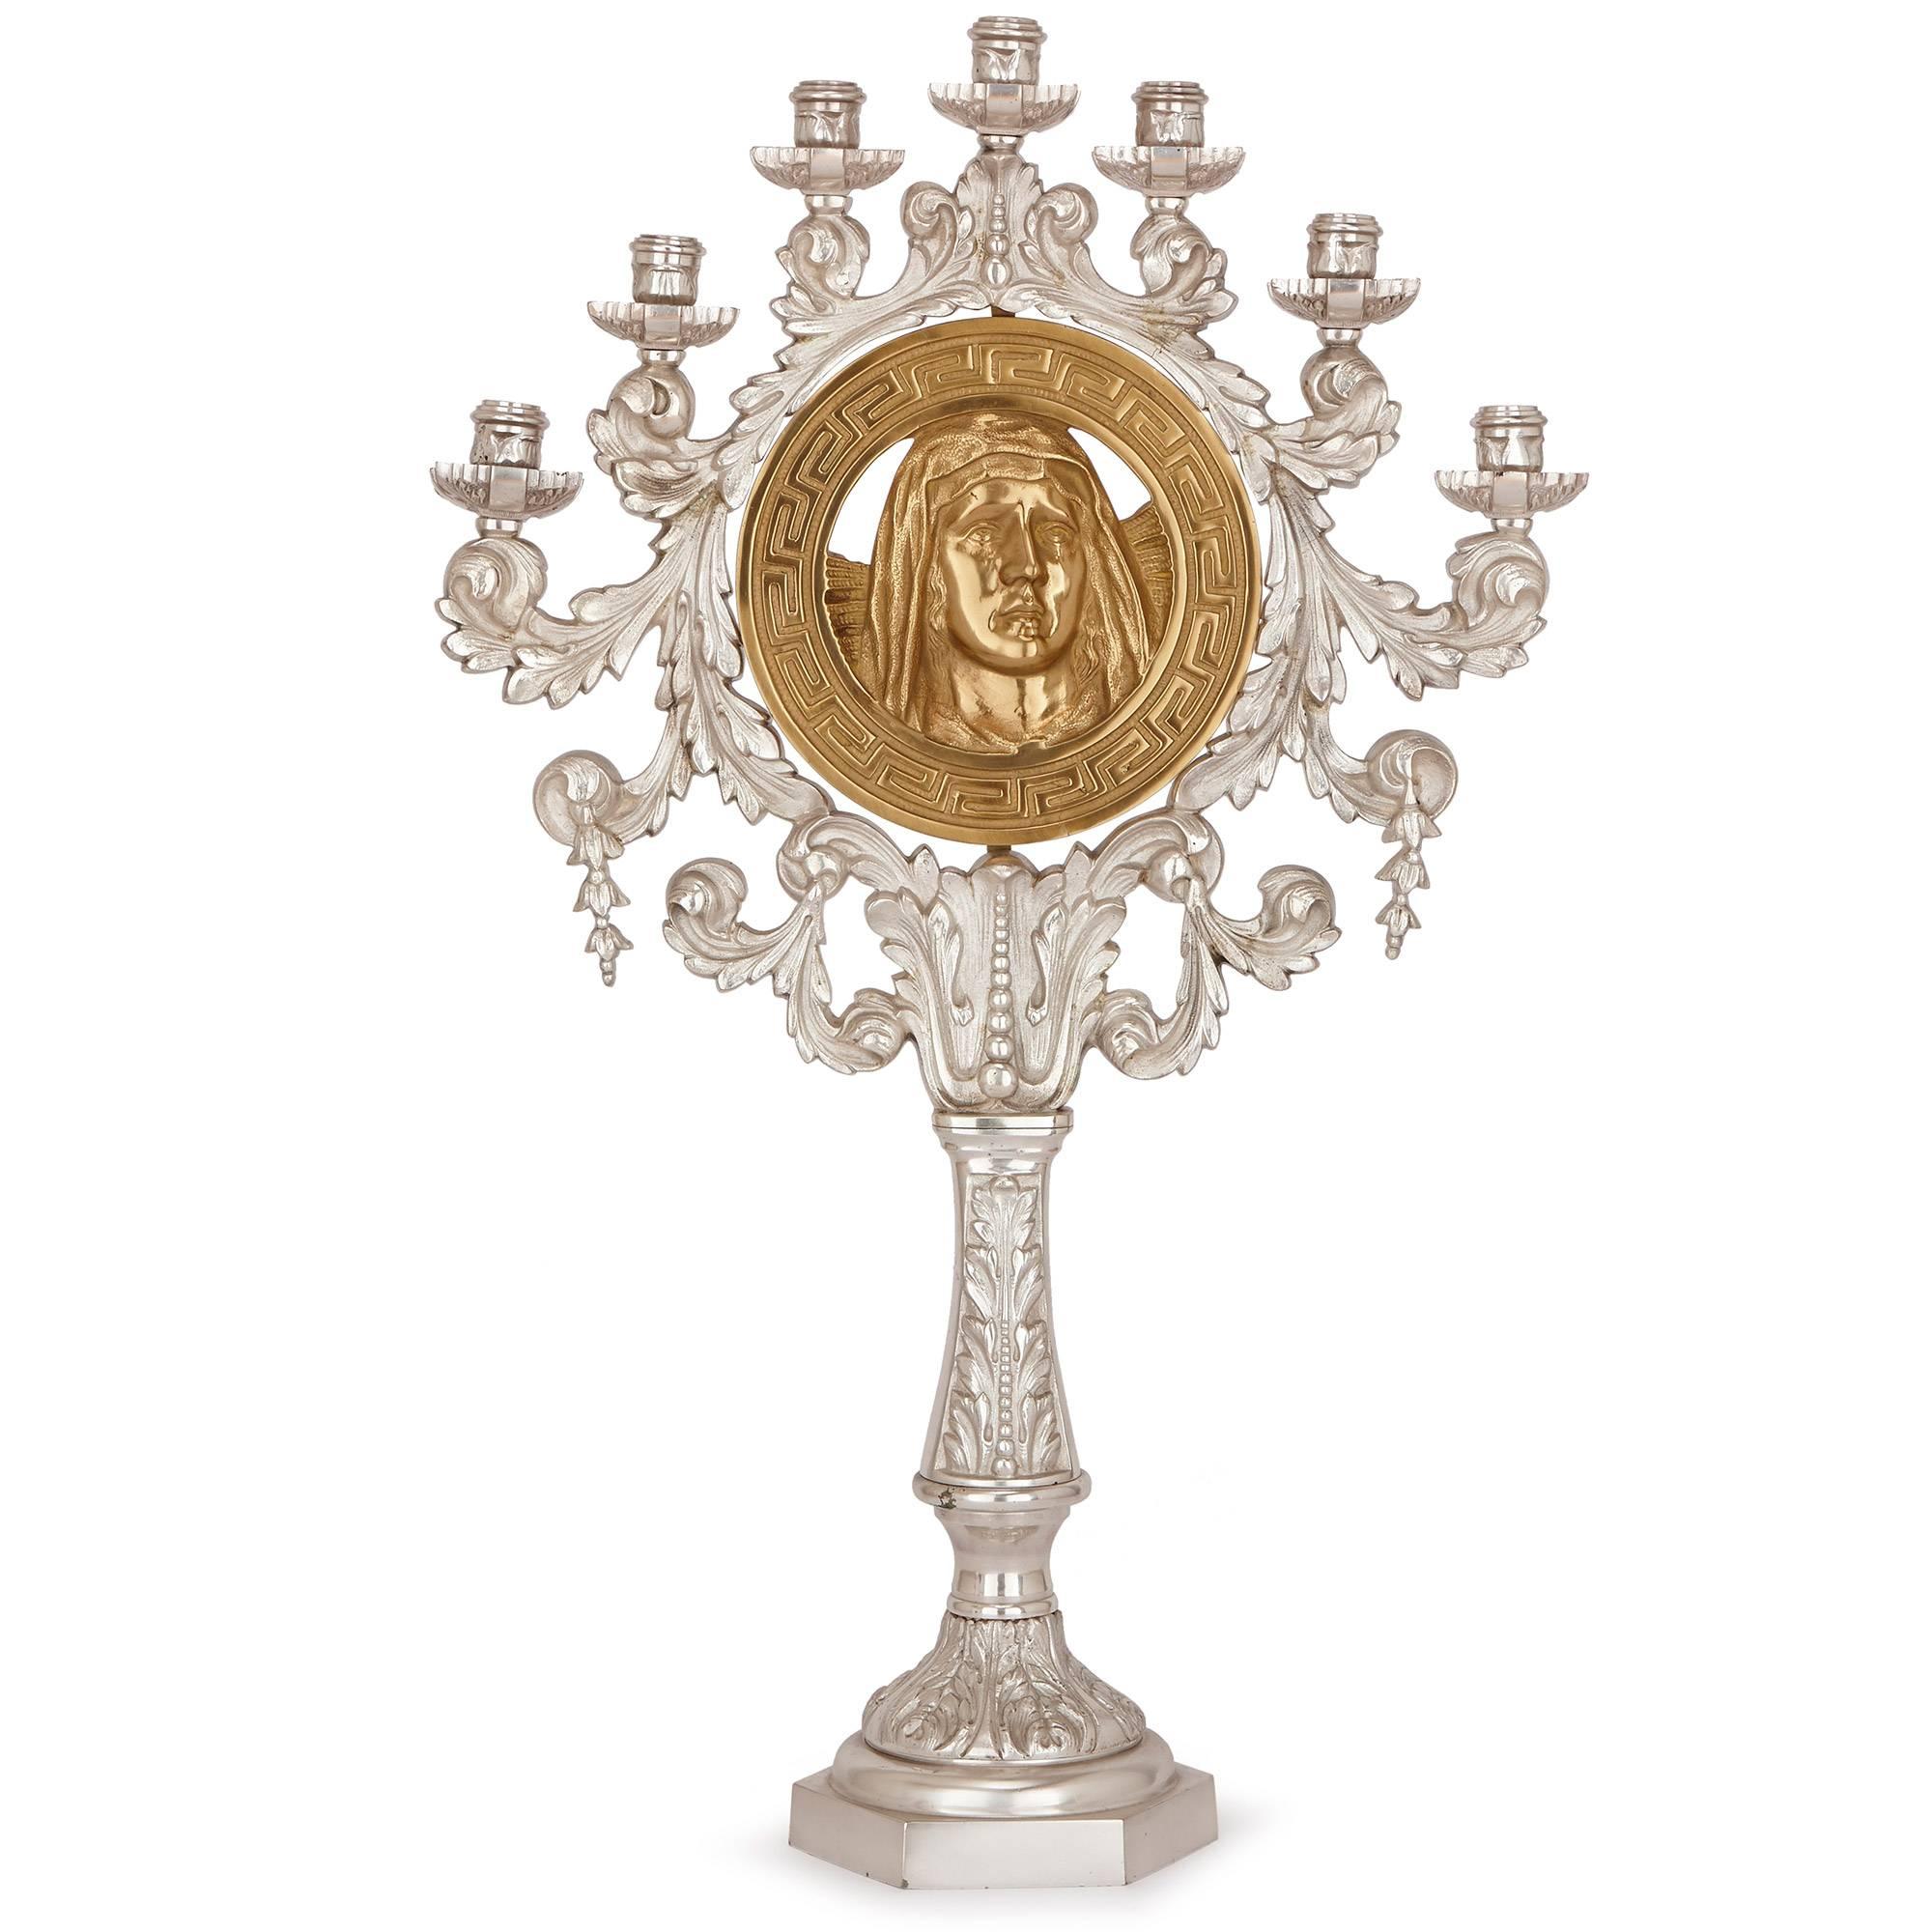 These striking and unusual candelabra each depict a portrait of Jesus and the Madonna in gilt bronze to the center. Each portrait is bordered by a gilt geometric circular pattern, further surrounded by a circular wreath of acanthus leaf in silvered